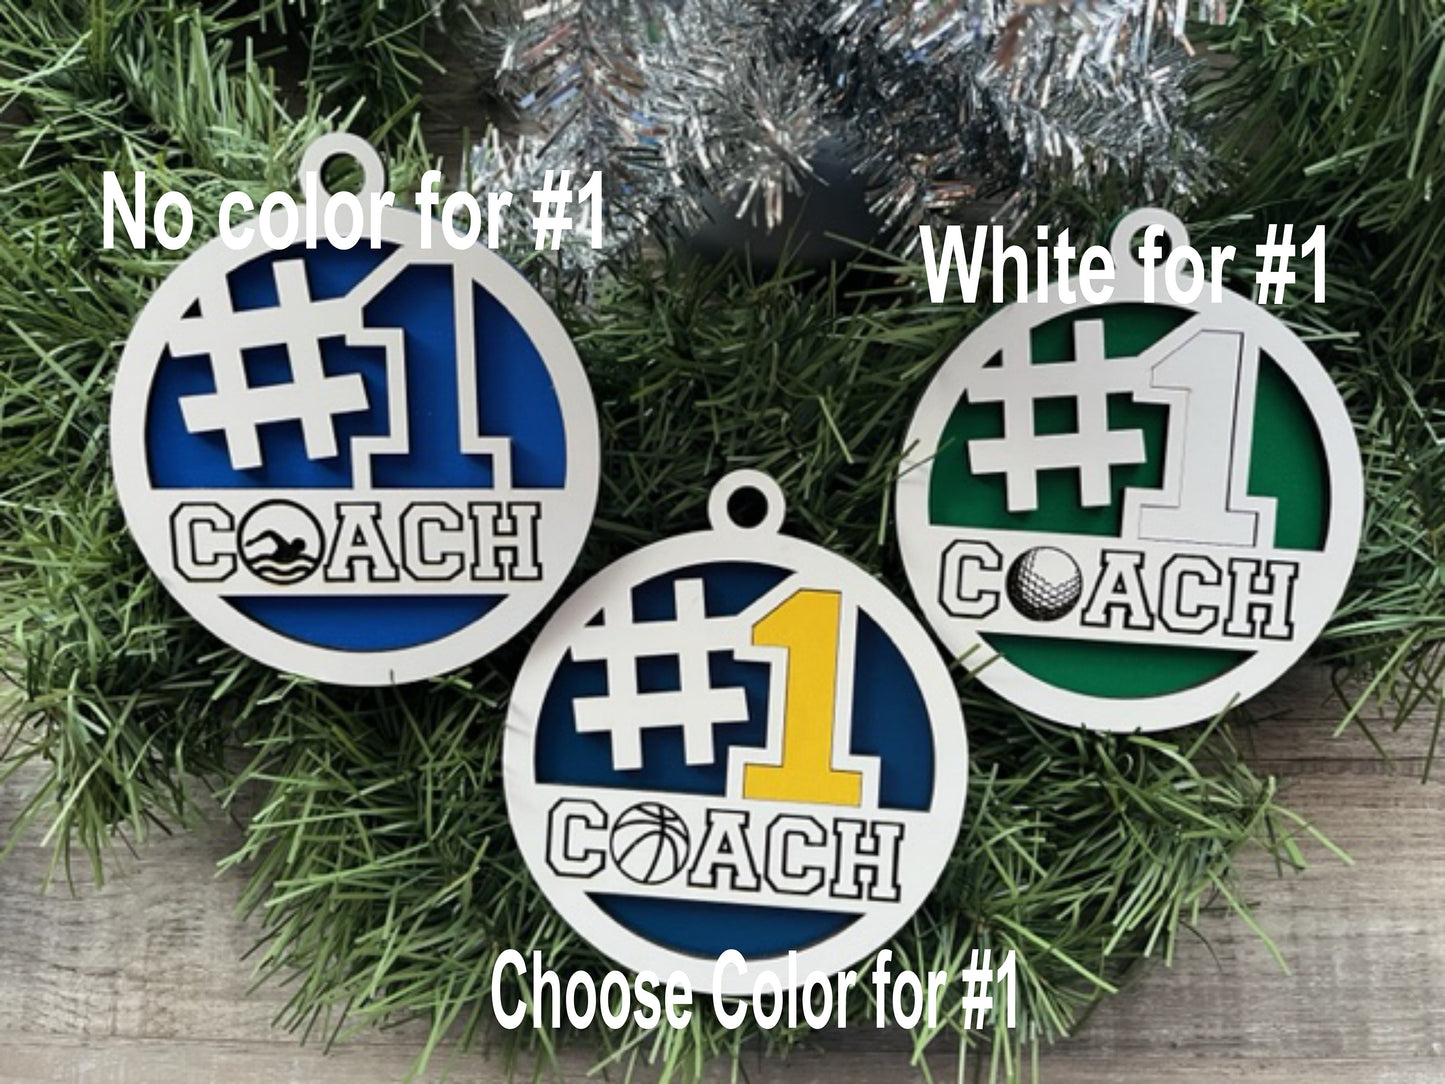 Swimming Coach Ornament/ #1 Coach Ornament/ Sports Coach/ Christmas Ornaments/ Sports Ornaments/ Choose Colors/ Coach Gift/ Gift for Coach